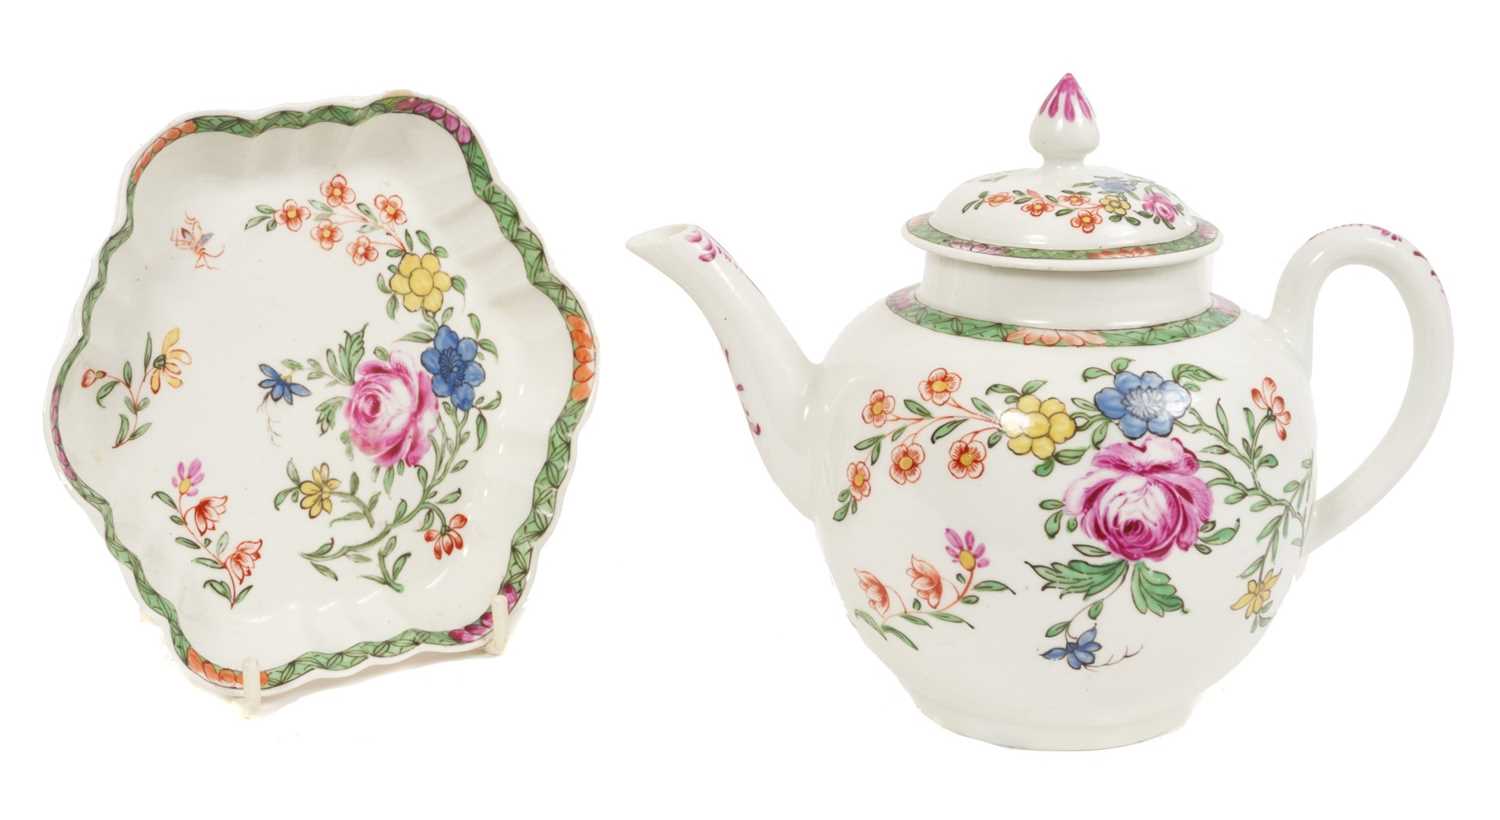 Lot 301 - A Worcester teapot, cover and stand, circa 1760. Provenance; Roderick Jellicoe